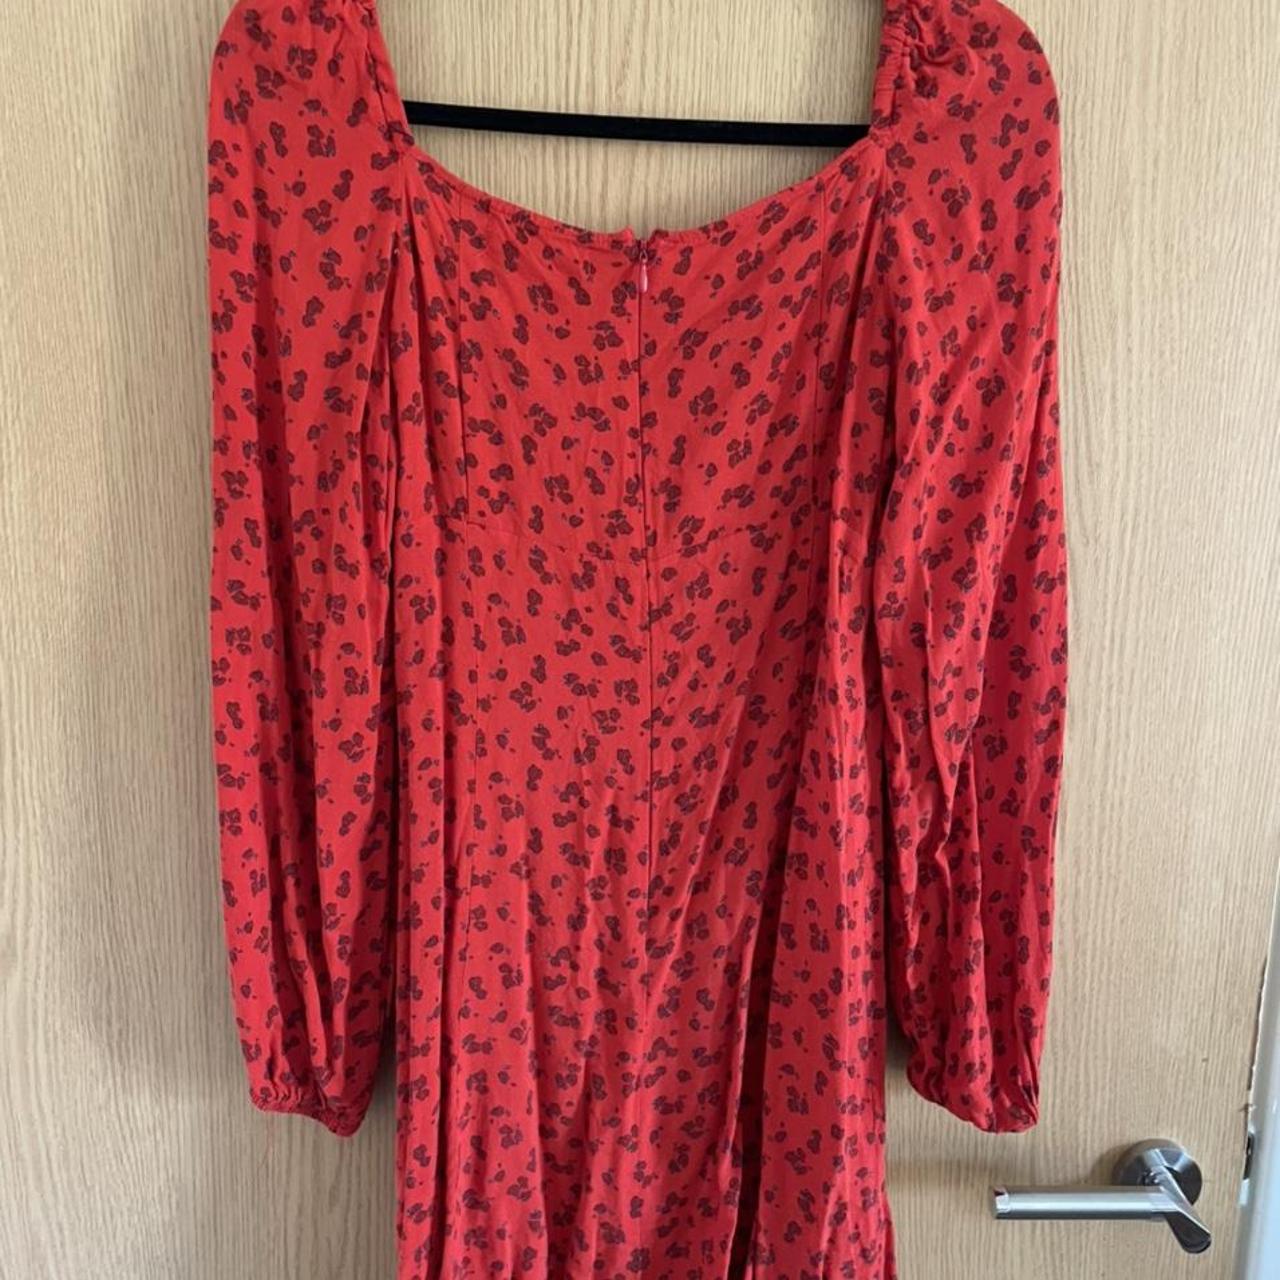 Urban Outfitters red floral dress in a size M. Best... - Depop